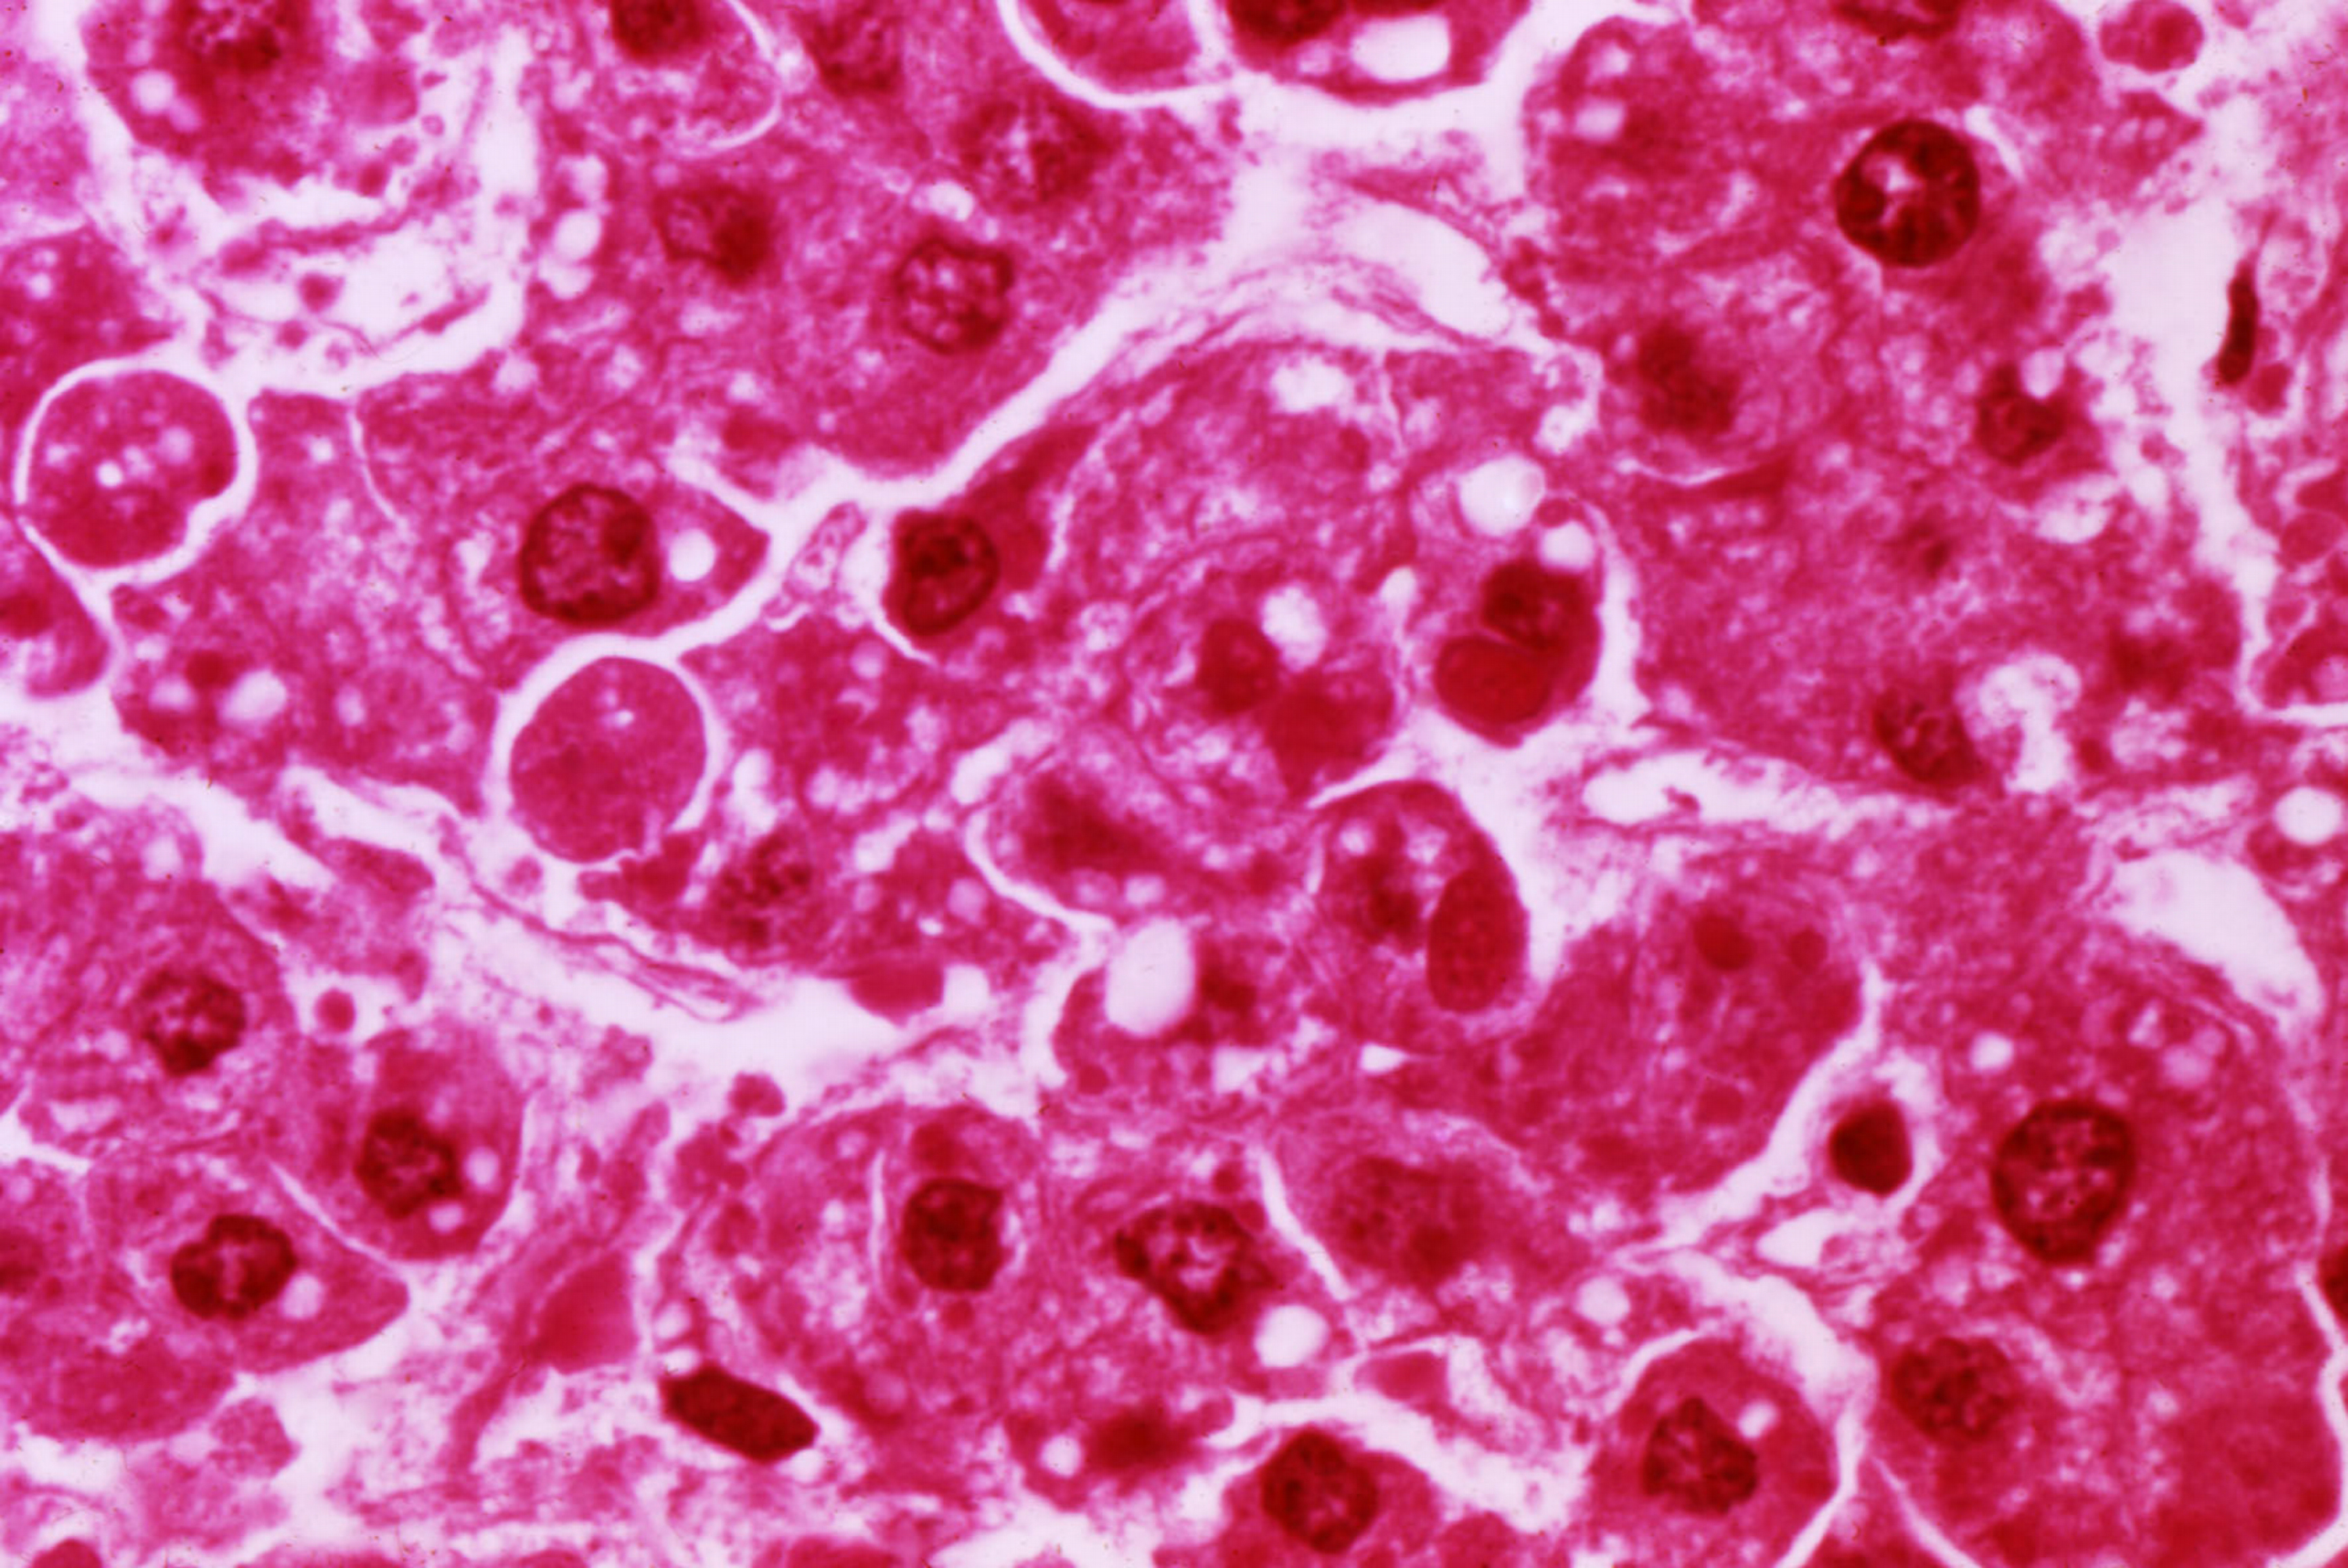 This micrograph reveals human hepatocytes infected with the Ebola virus, the cause of Ebola hemorrhagic fever. The Ebola pathogen is a member of the Filoviridae family of RNA viruses. It is known to be spread through close contact with an infected host. (Media for Medical / UIG via Getty Images)